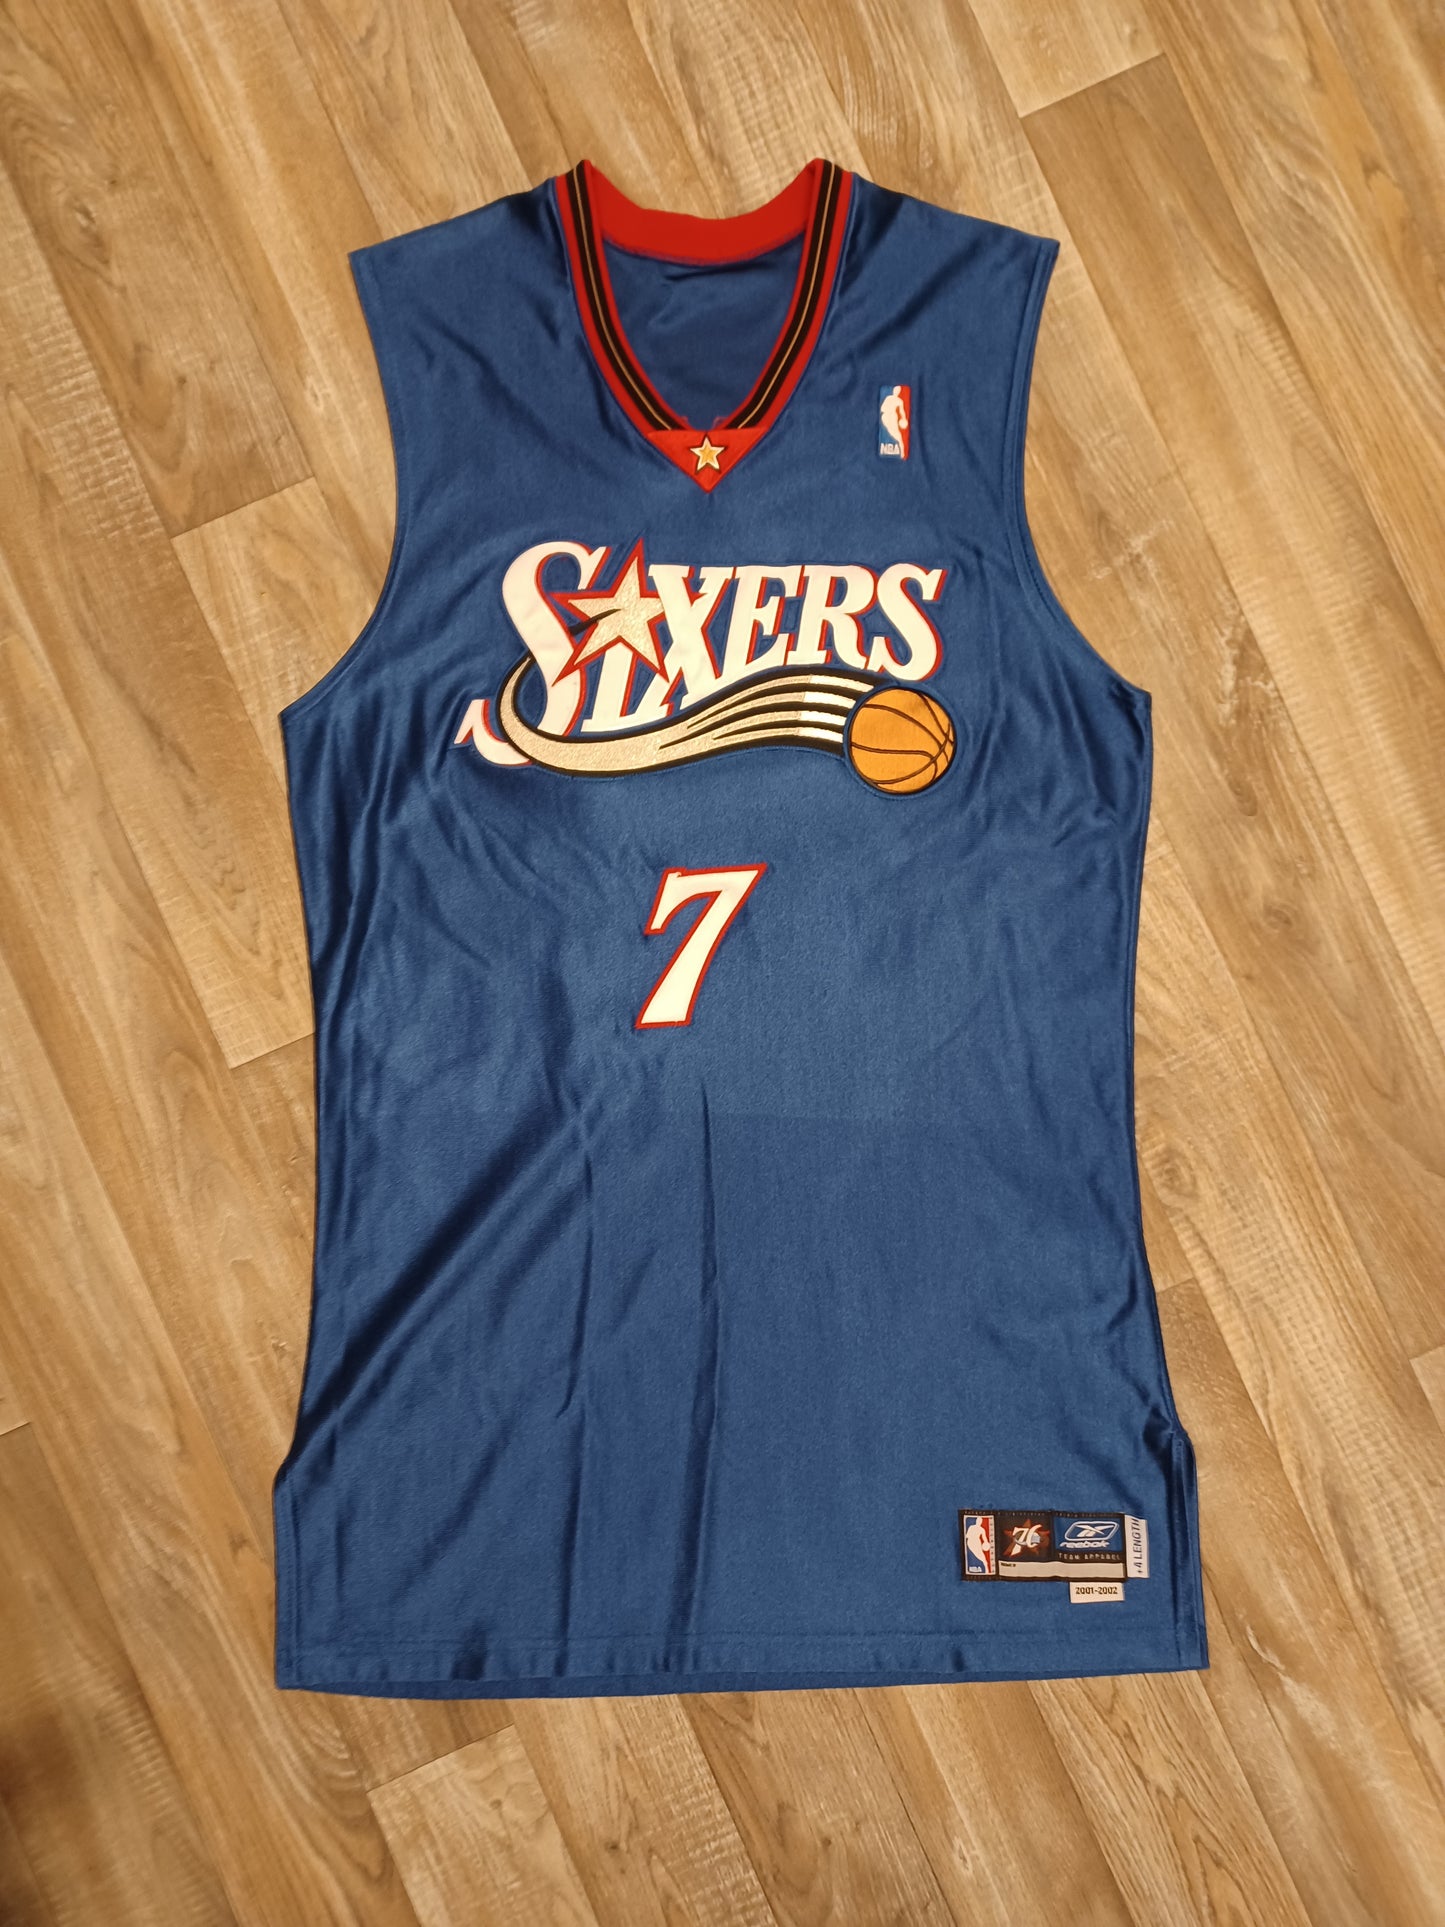 John Salmons Authentic Game Issued Philadelphia 76ers Jersey Size Large